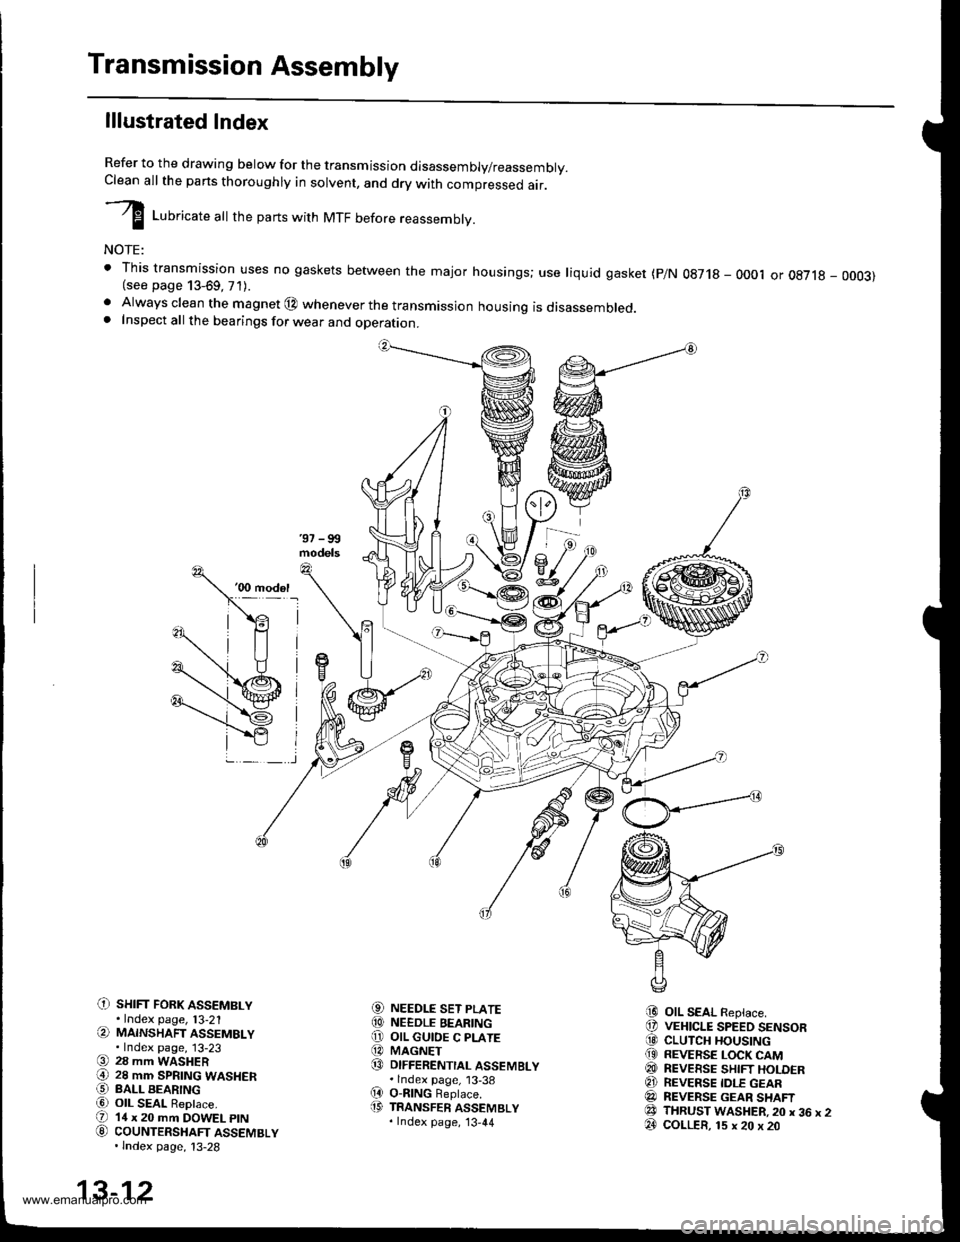 HONDA CR-V 1999 RD1-RD3 / 1.G Workshop Manual 
Transmission Assembly
lllustrated Index
Refer to the drawing below for the transmission disassembly/reassembly.Clean all the pans thoroughly in solvent, and drv with comoressed air.
I LuUri""r" utt t